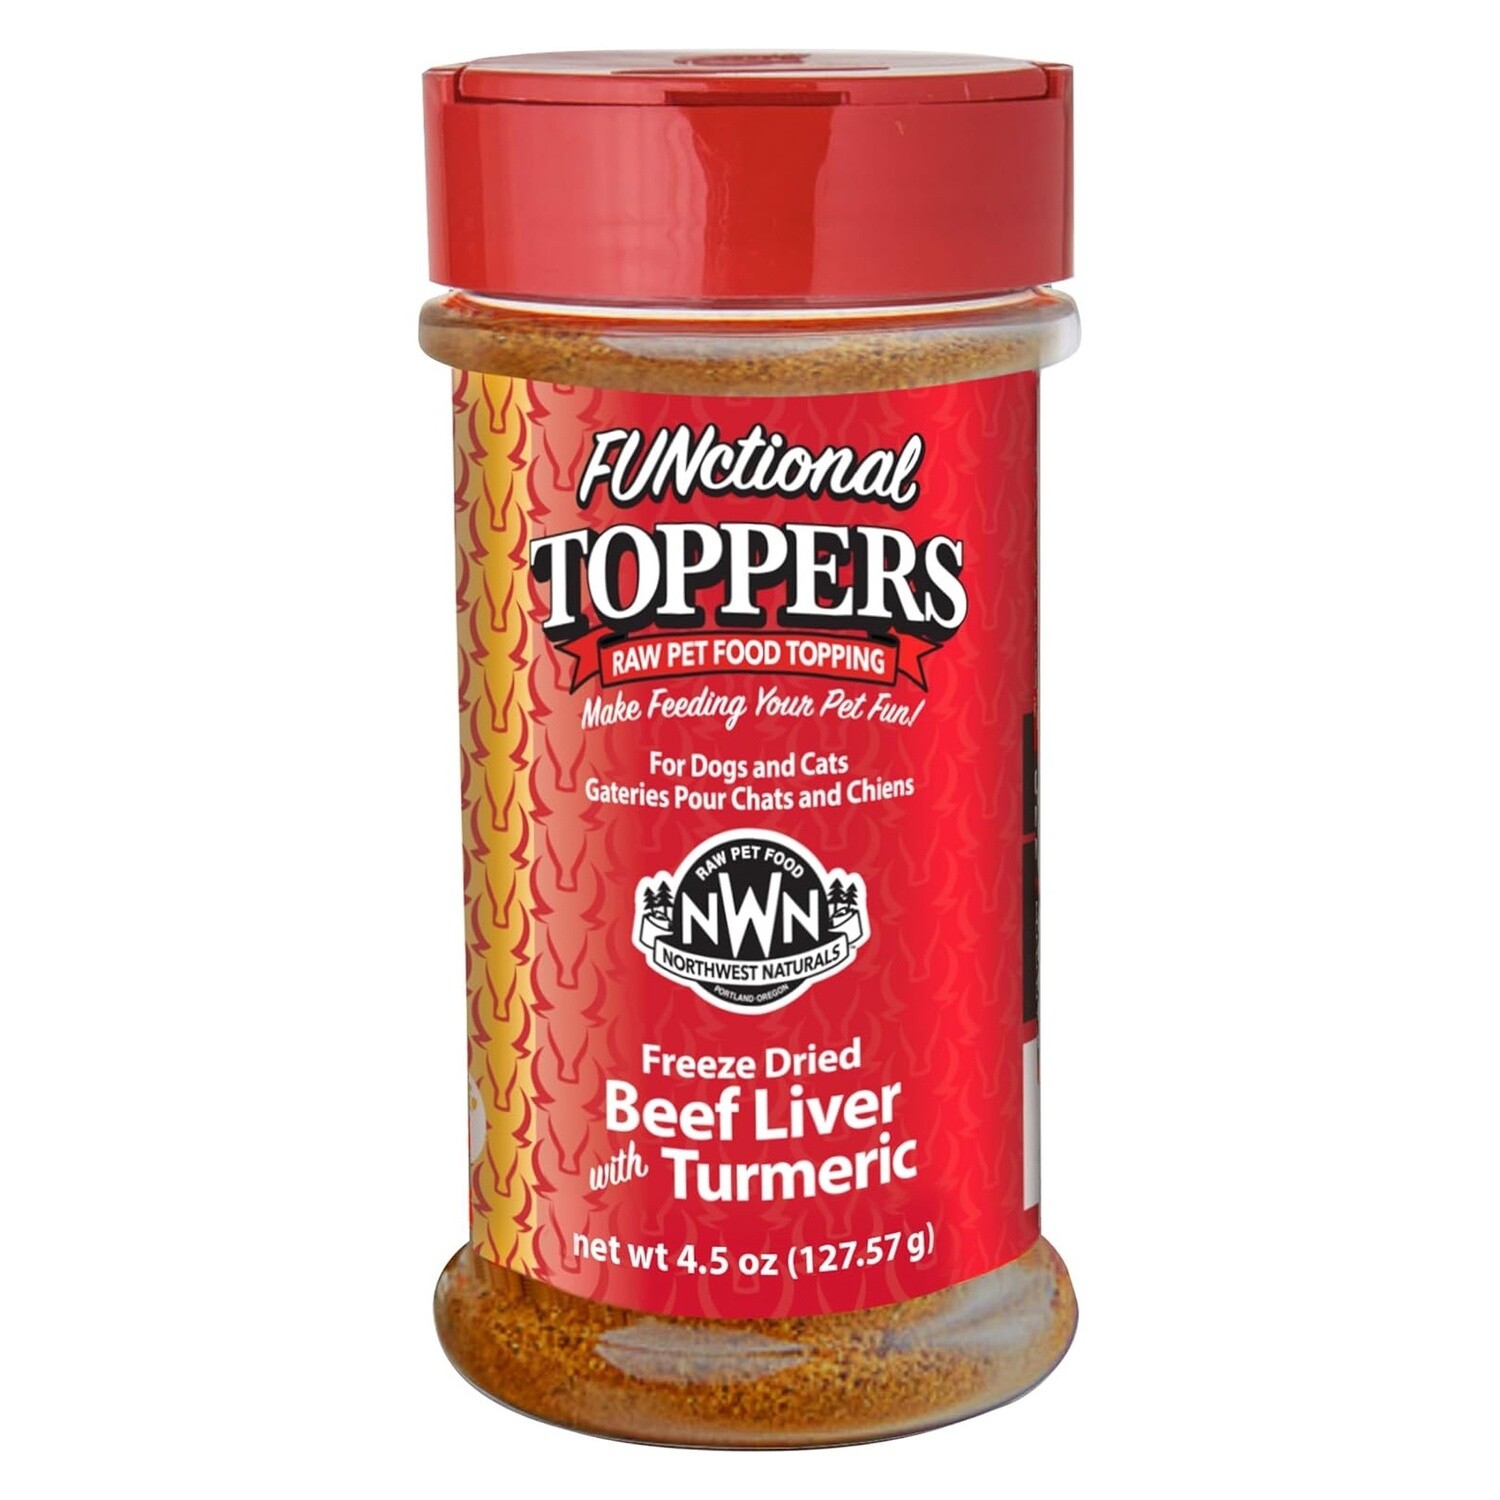 FUNctional Toppers Freeze Dried Beef Liver & Turmeric 4.5oz